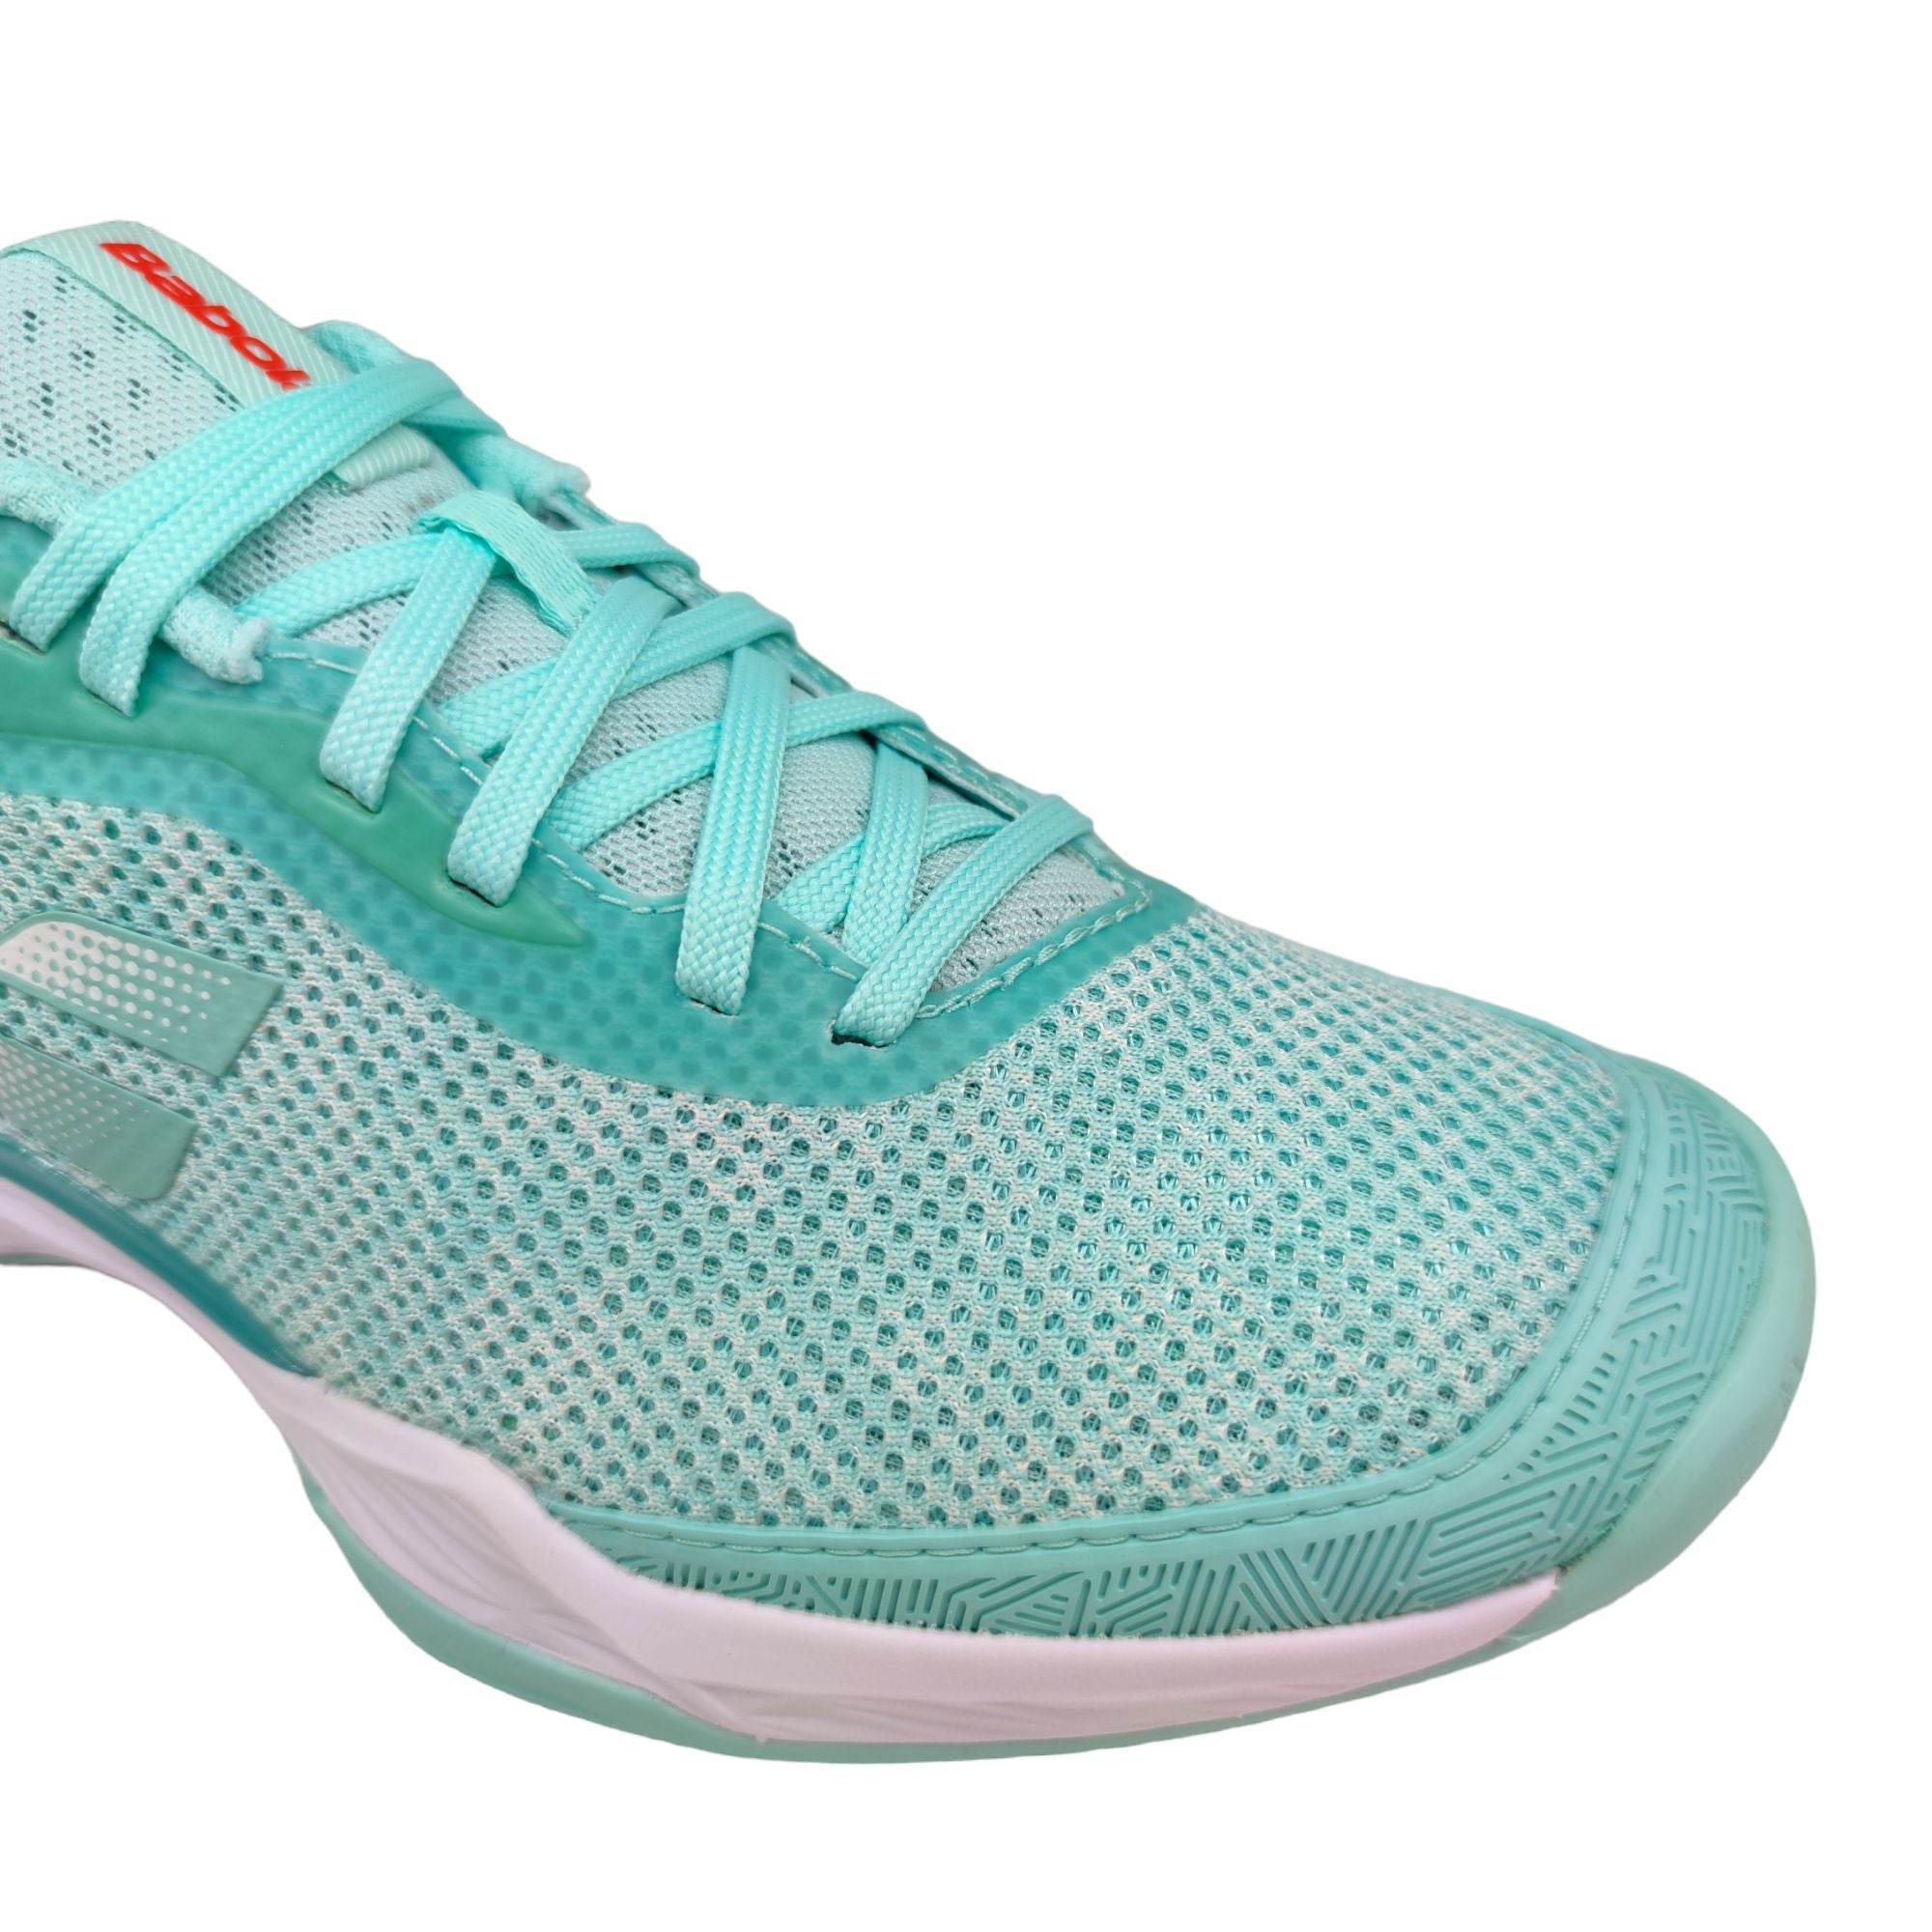 Women's Jet Tere Clay Tennis Shoes Yucca/White 